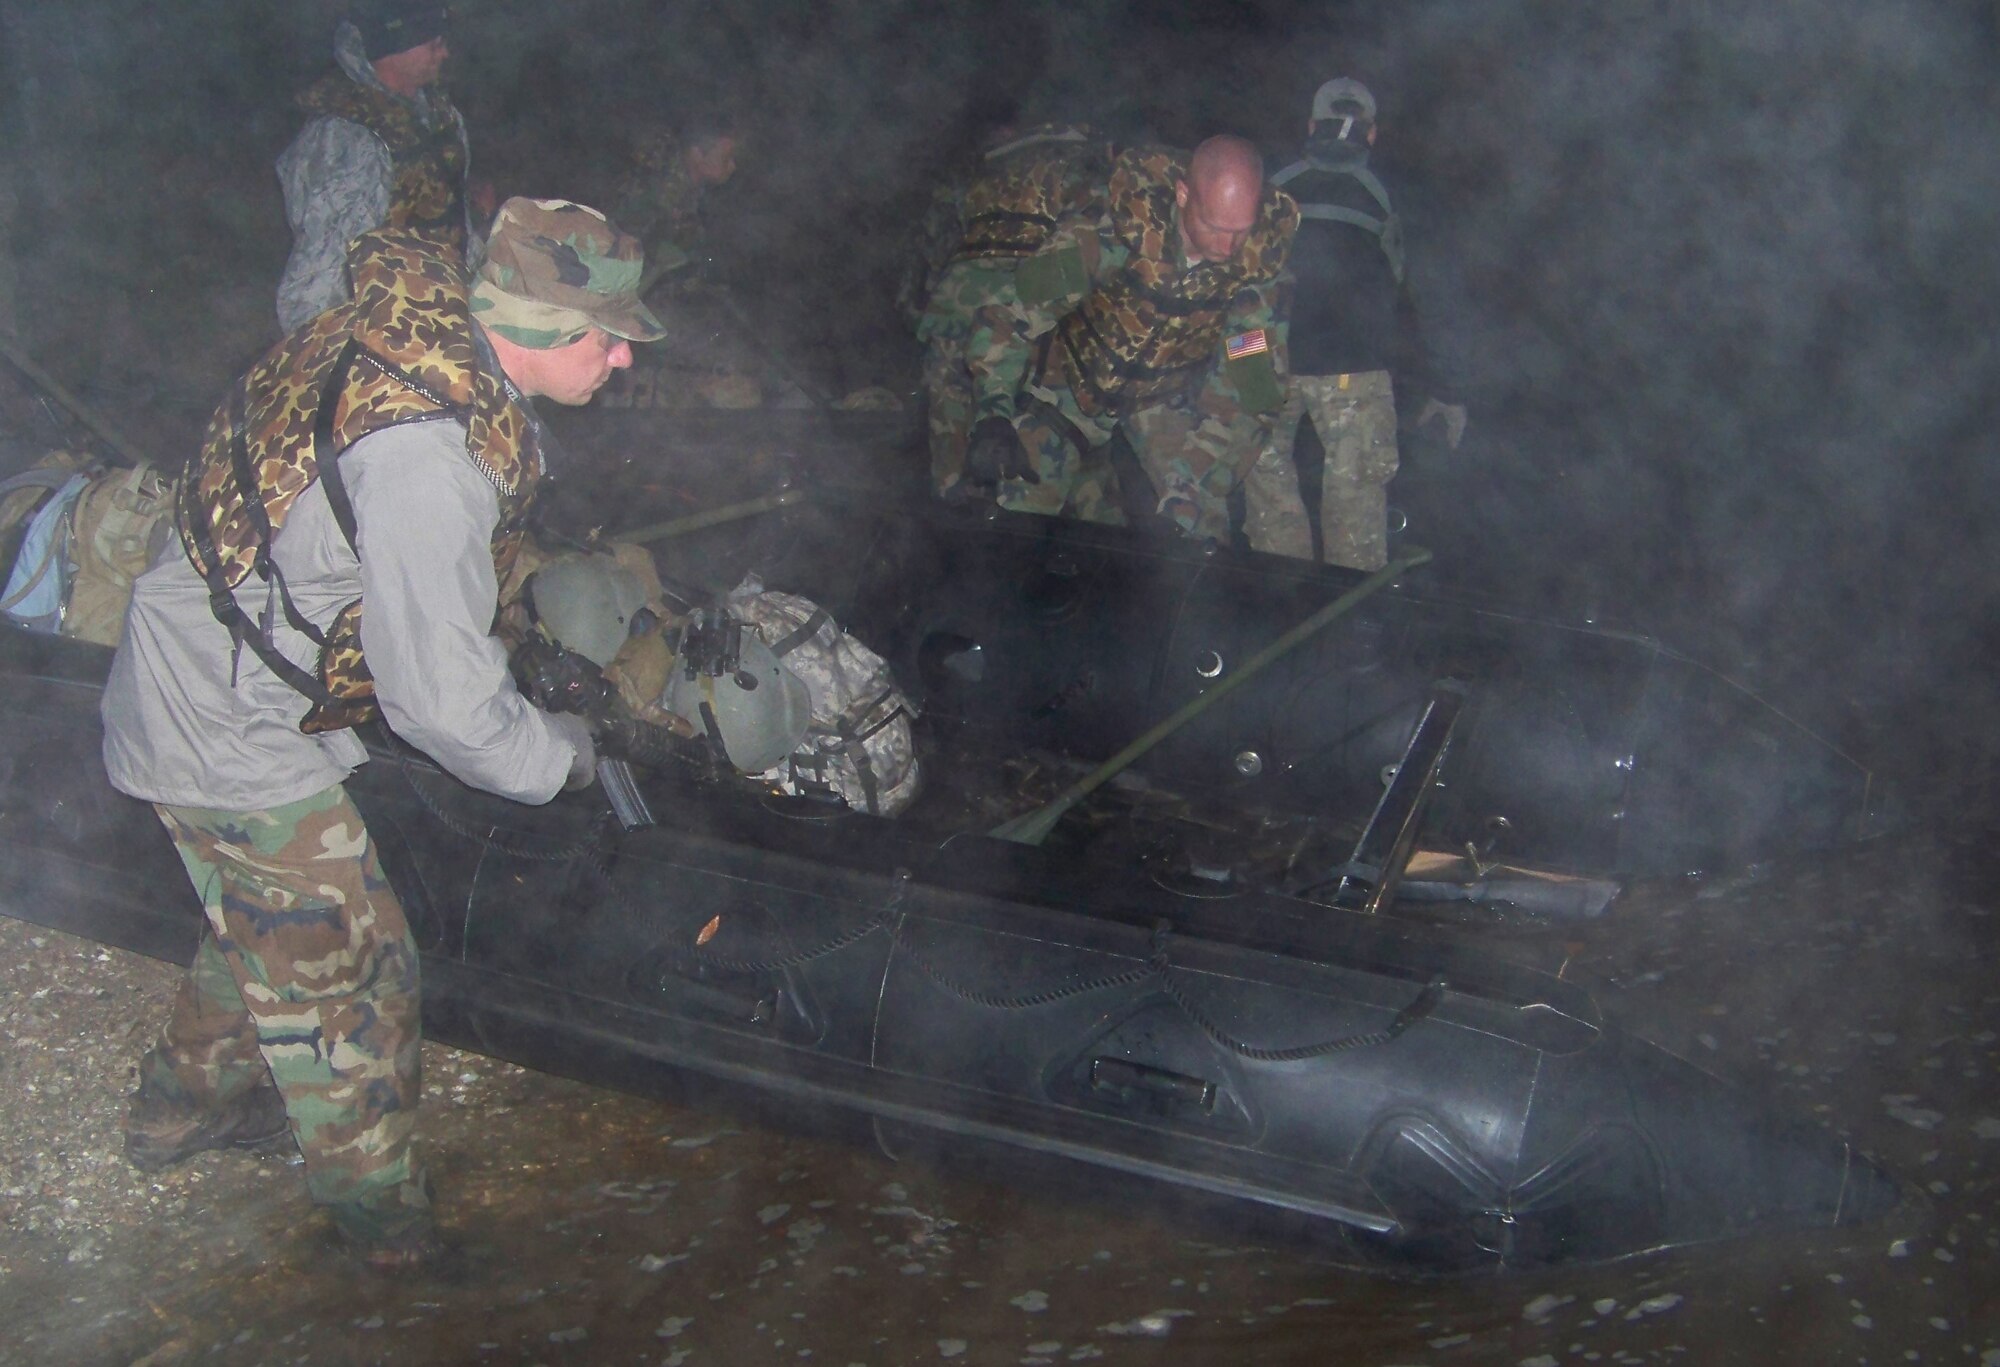 Tech. Sgt. Jason Rushing (left) and Tech. Sgt. Charles Smith (center), both combat aviation advisors with the 19th Special Operations Squadron, prepare a row boat for travel during the Raven Claw field exercise at the Eglin range Nov. 5. The boats were used during part of a 20-mile expedition across the Eglin range at night. (Air Force photo by Airman 1st Class Joe McFadden.)